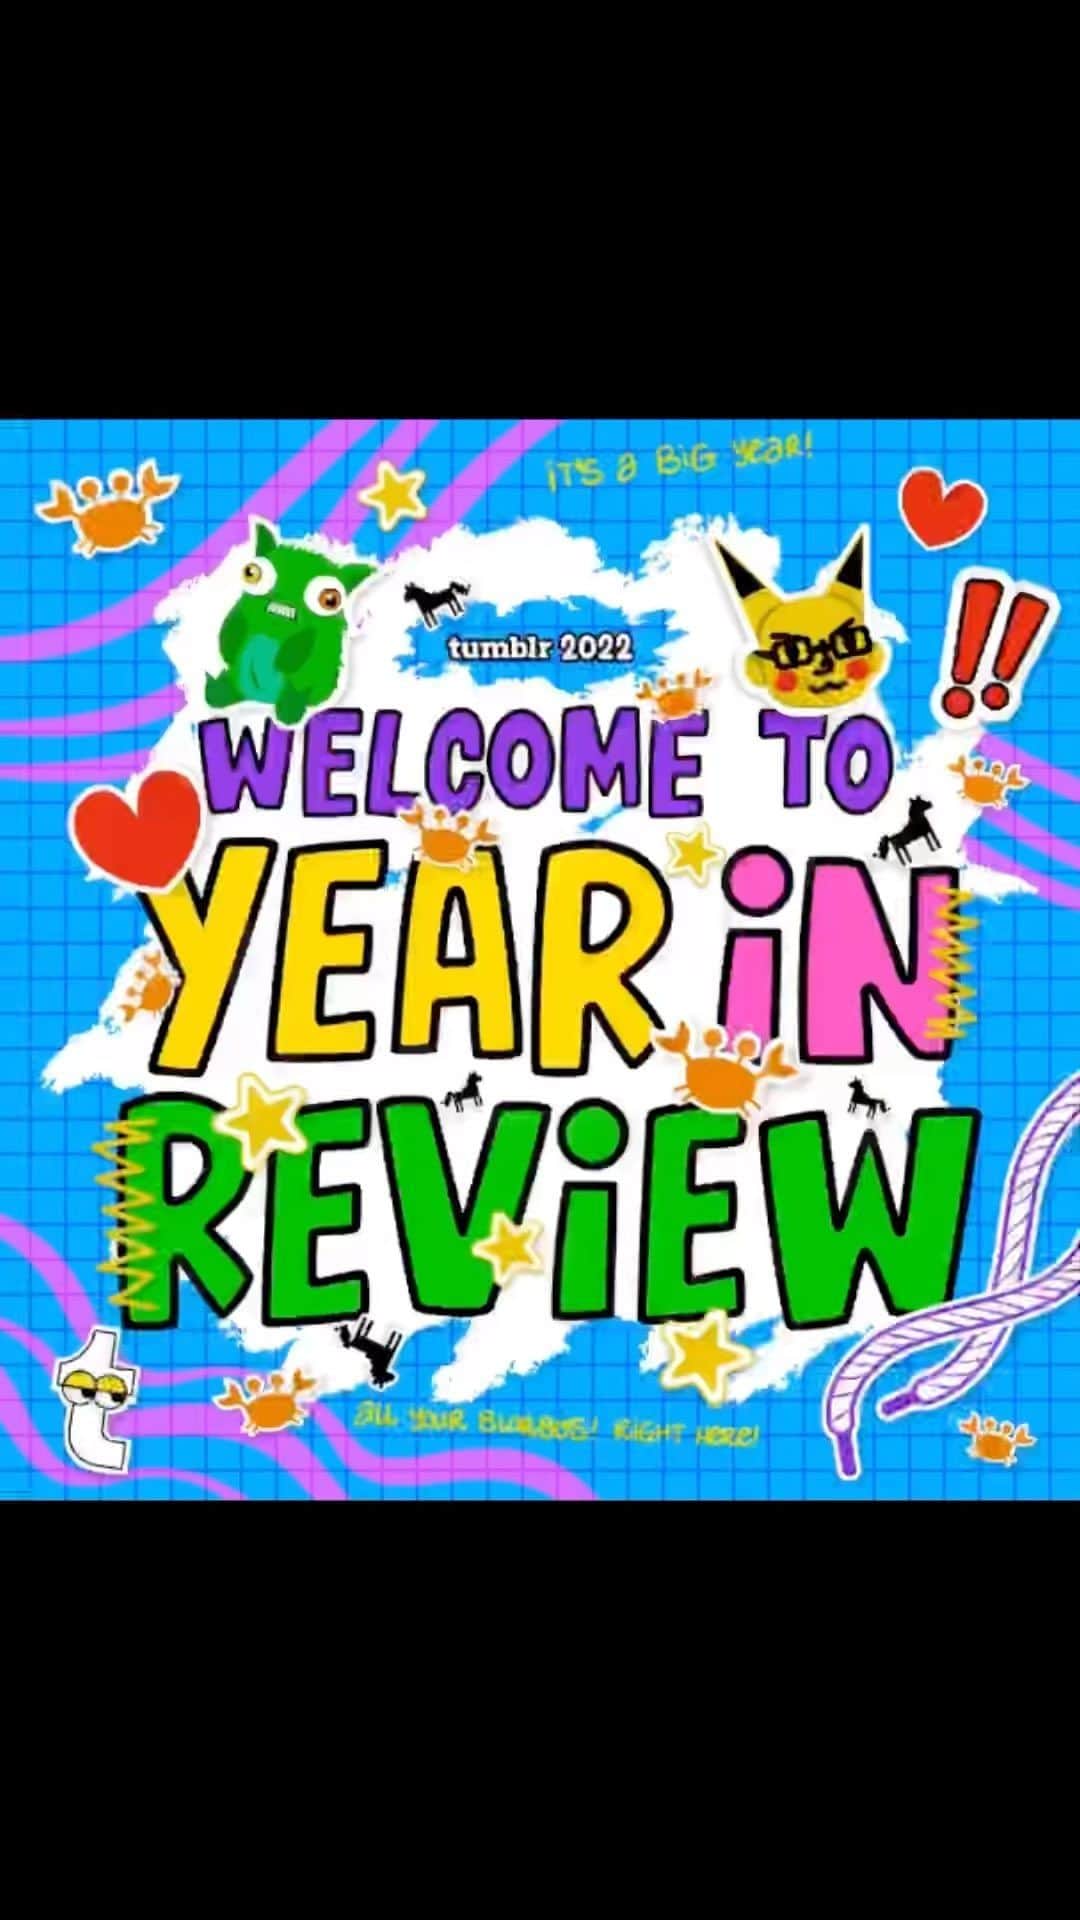 Tumblrのインスタグラム：「It’s that time again.  It’s Tumblr’s 2022 Year in Review!  Every year, the team behind Fandometrics analyzes, categorizes, and ranks all the most discussed things on Tumblr—that’s a year’s worth of your tags, searches, posts, likes, and reblogs—and packages them up into a little thing we like to call Year in Review.   Tumblr’s Year in Review contains a full 365 days’ worth of data, but it runs from October 21, 2021, to October 20, 2022. Tragically, this means Goncharov (1973), the greatest mafia movie ever made, will not appear on the lists this year. We’re just as disappointed as you are, but that gives us all something to look forward to in 2023—especially if the @vancityreynolds remake gets a release date.  See how your favorite fandoms ranked at.tumblr.com/YearInReview」